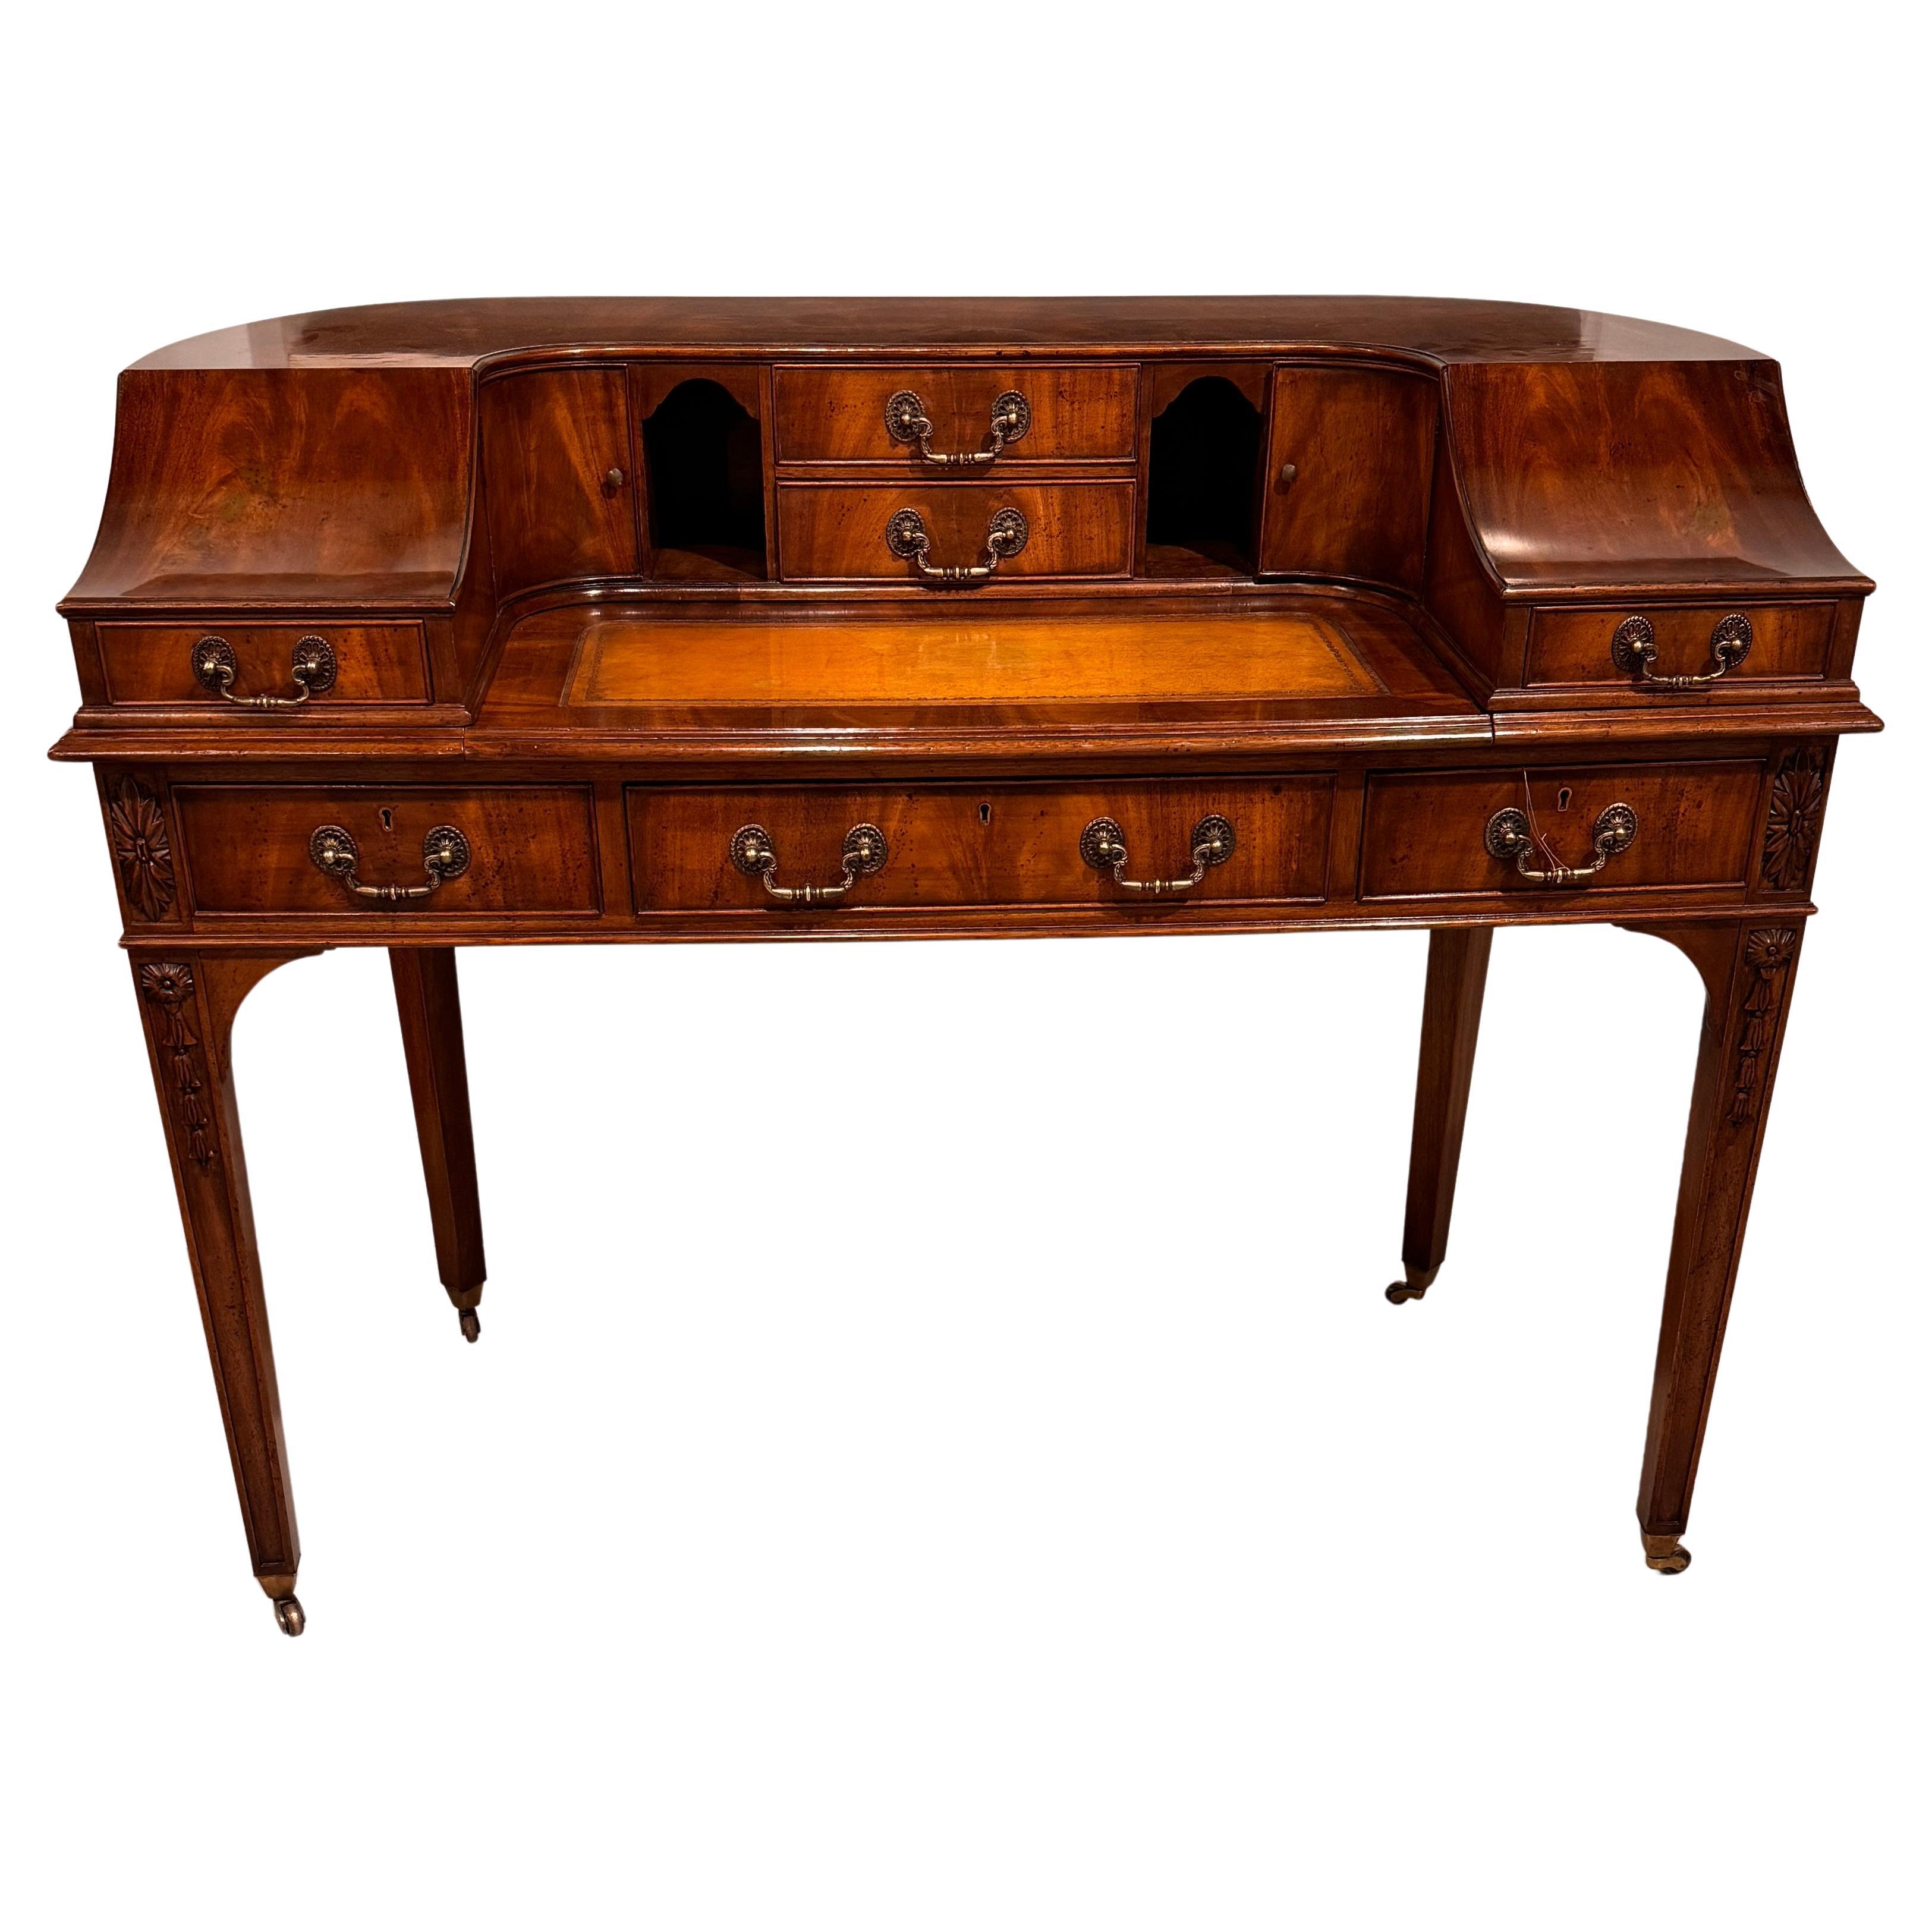 Carlton House Desk Vintage English Styling with Leather Writing Surface